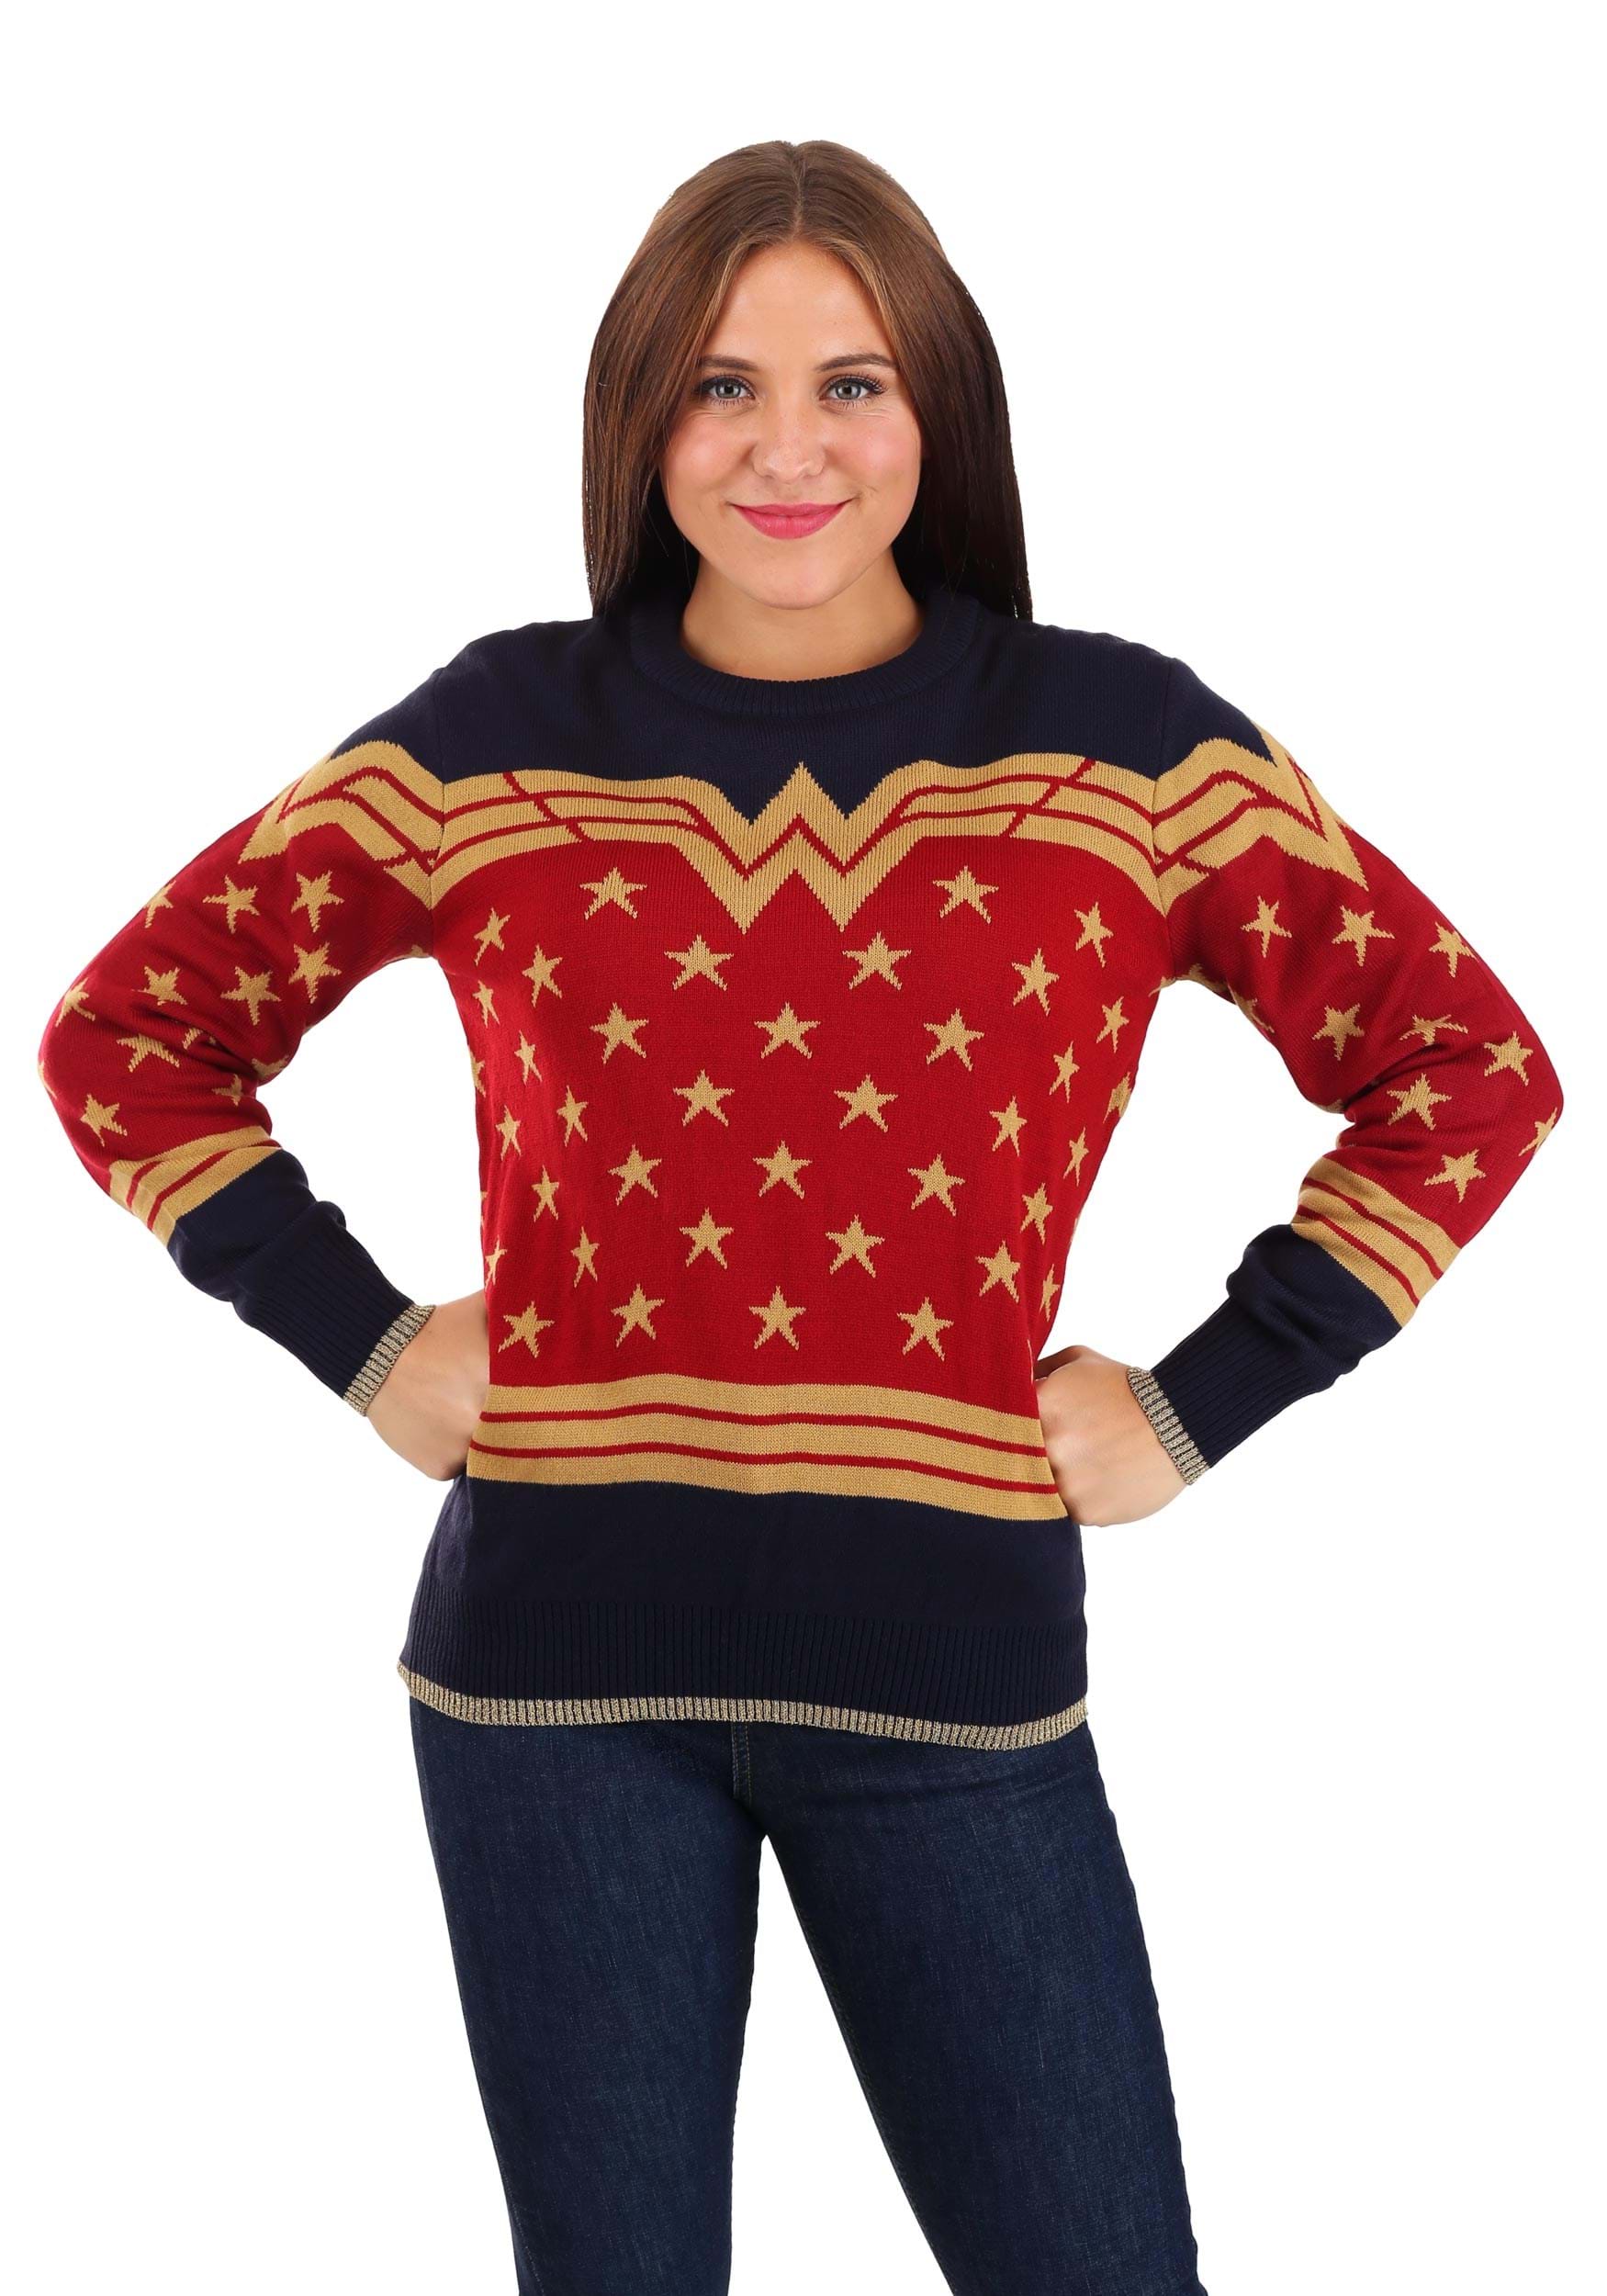 S/XS New Women's Just Chillin Fun Christmas Sweater Red/Blue 